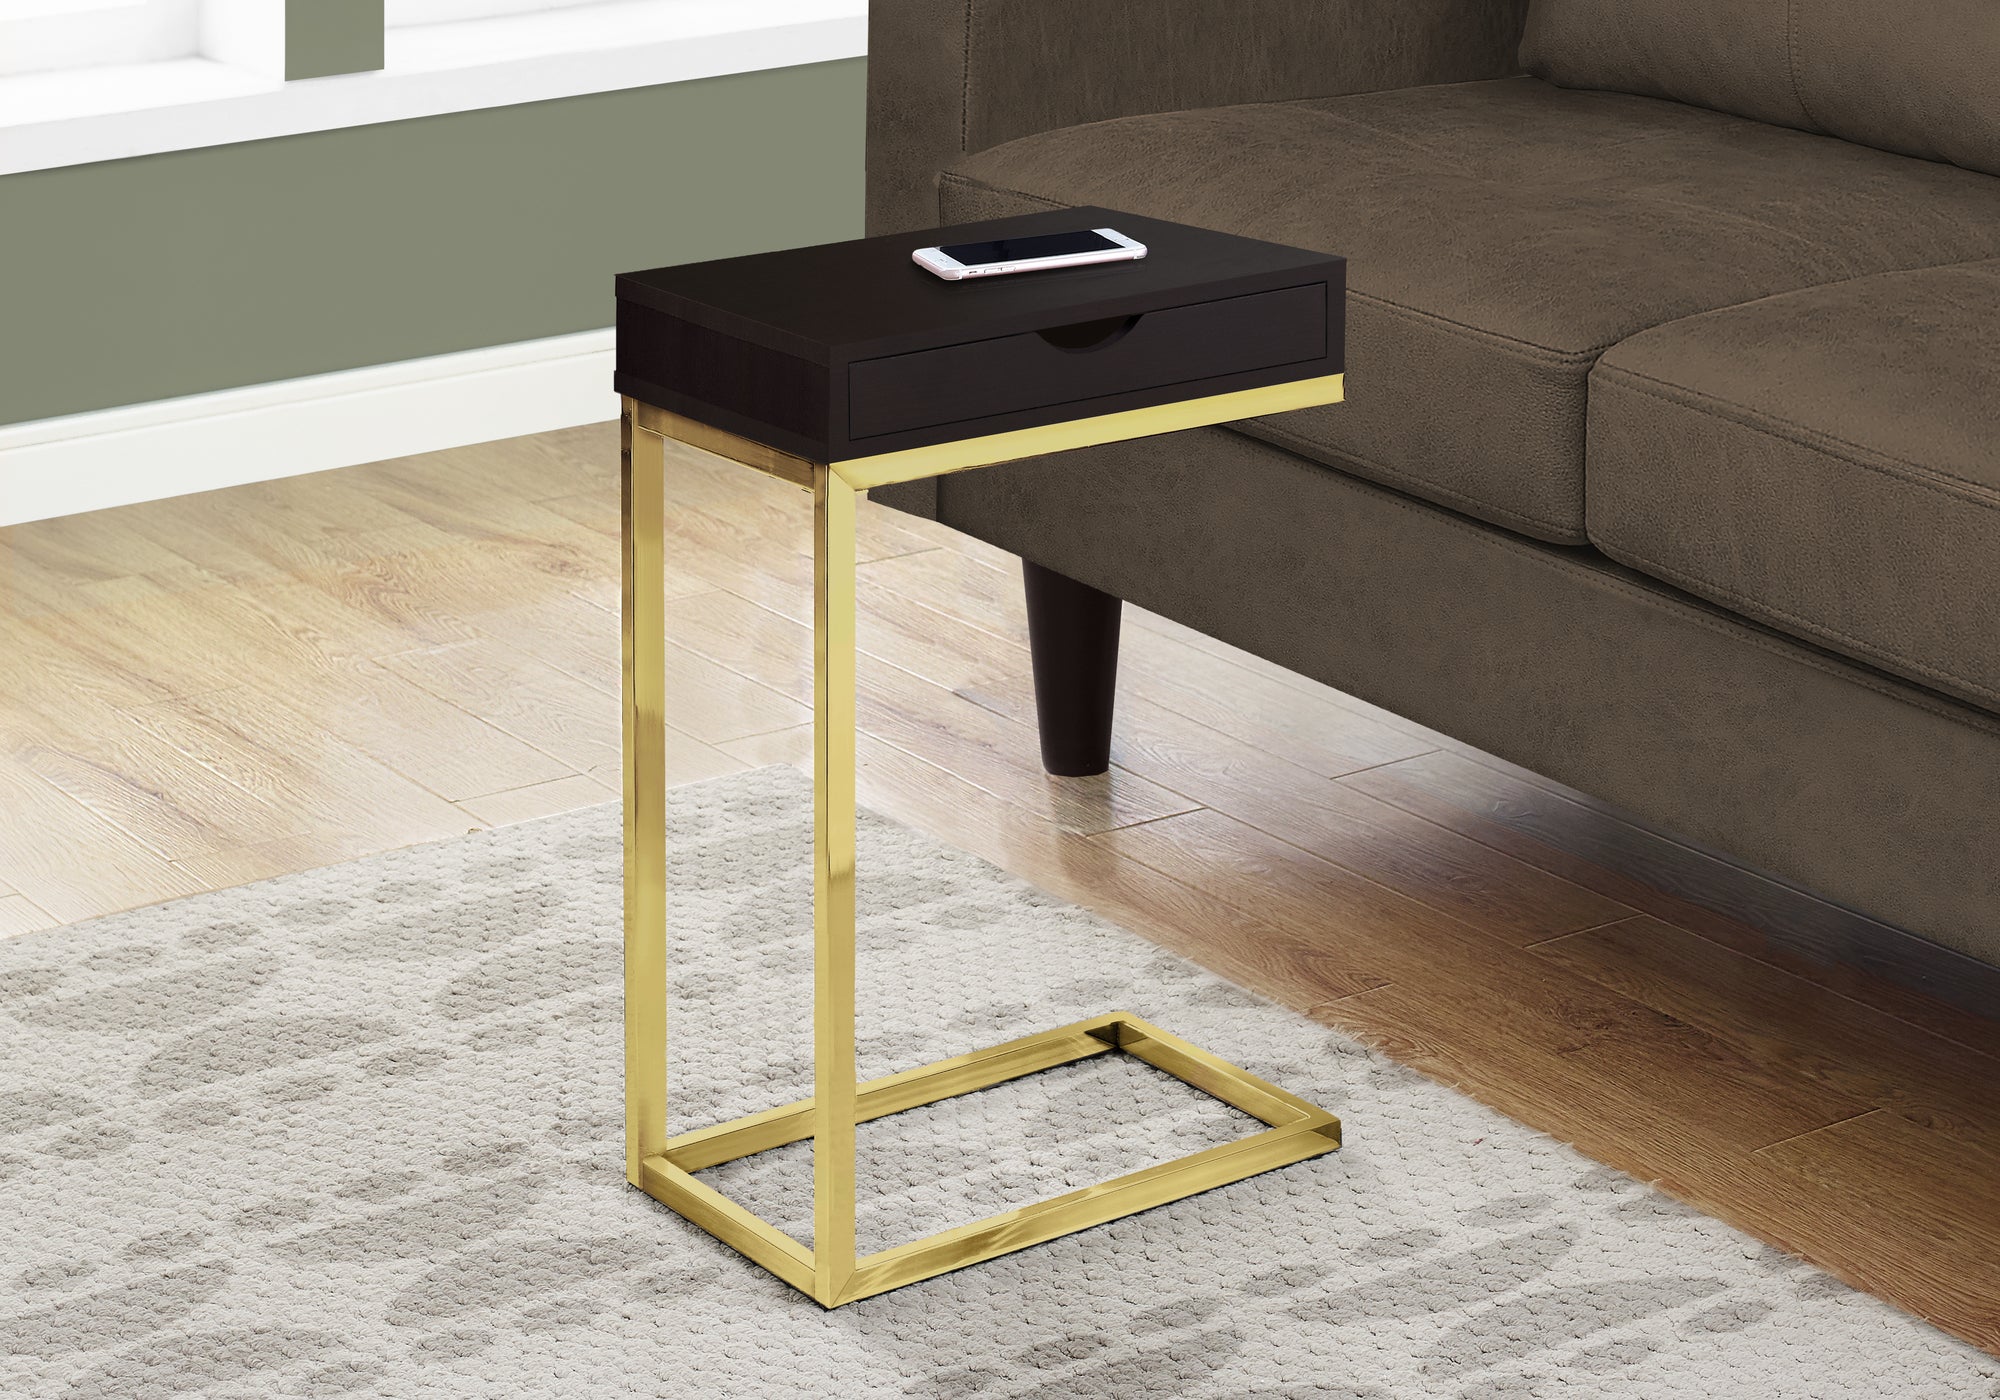 MN-813236    Accent Table, C-Shaped, End, Side, Snack, Living Room, Bedroom, Storage Drawer, Metal Legs, Laminate, Dark Brown, Gold, Contemporary, Modern